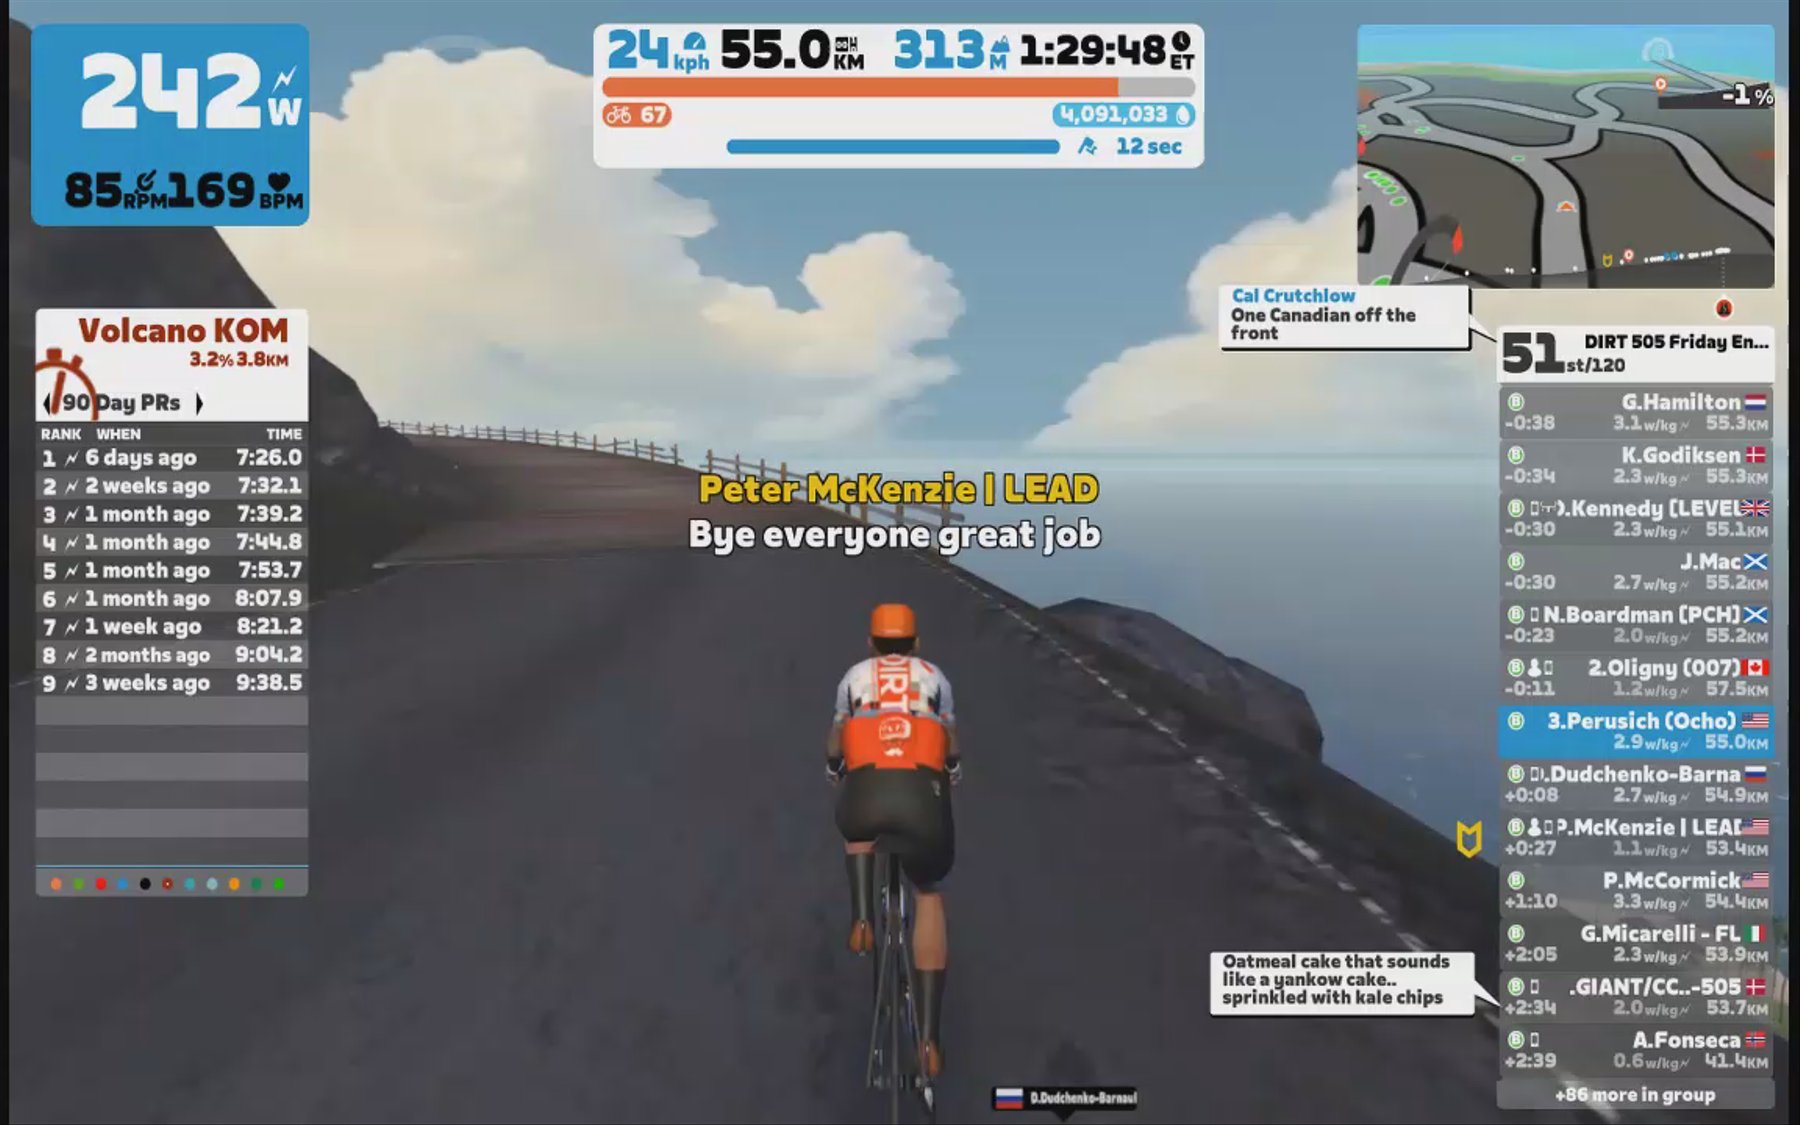 Zwift - Group Ride: DIRT 505 Friday Endurance Ride (B) on Spiral into the Volcano in Watopia